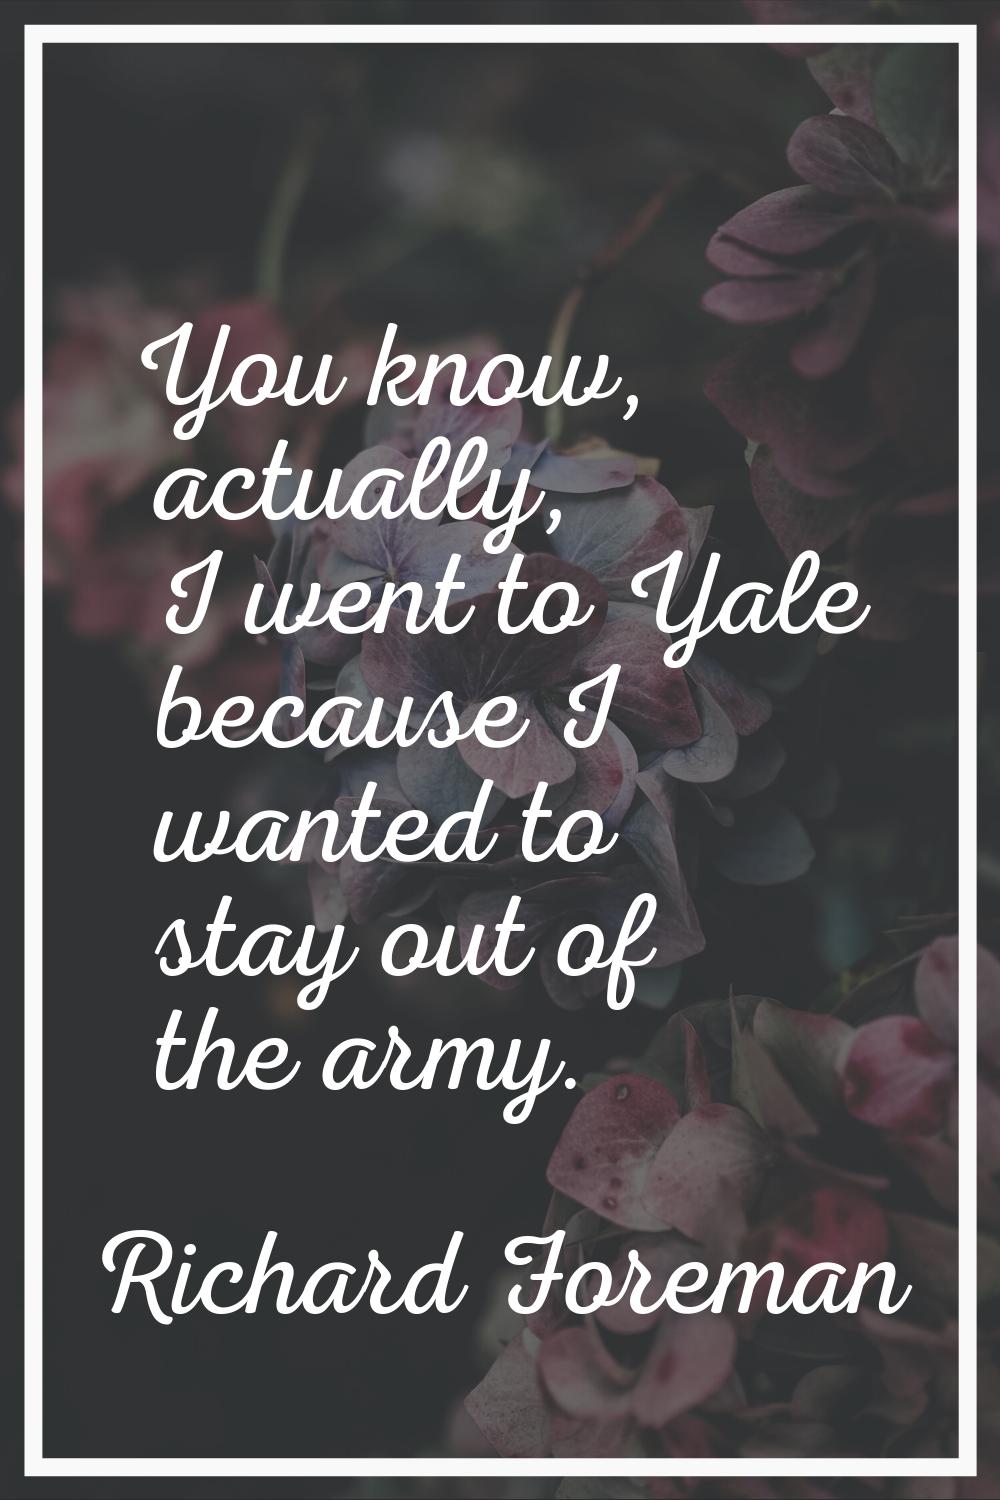 You know, actually, I went to Yale because I wanted to stay out of the army.